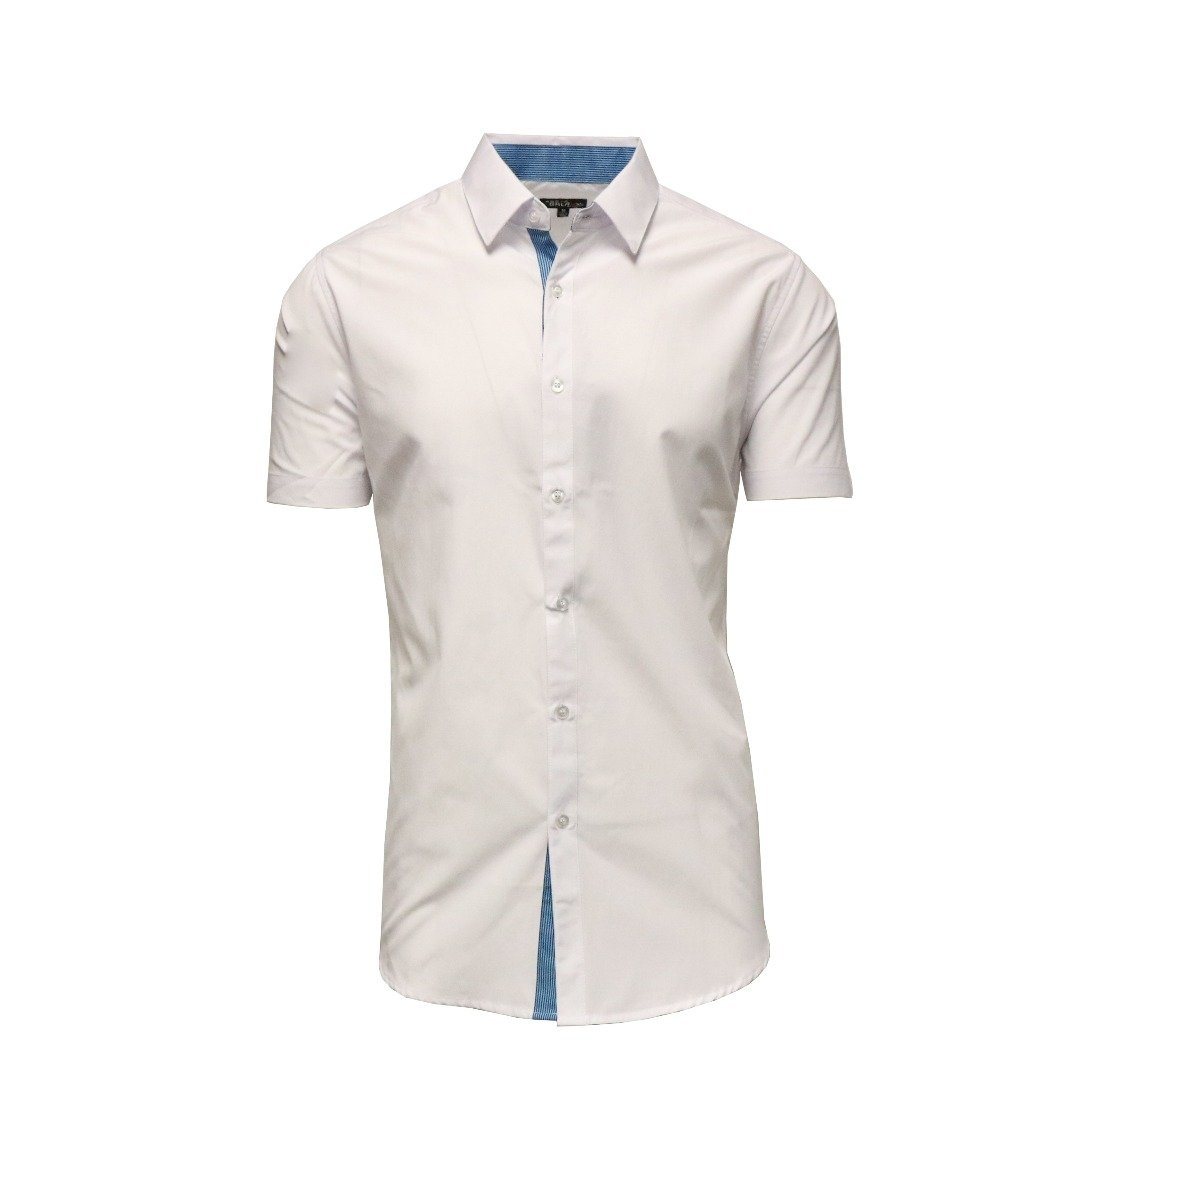 Men&#39;s Short-Sleeve Slim-Fit Shirt with Contrast Trim - Assorted Sizes / White / XL